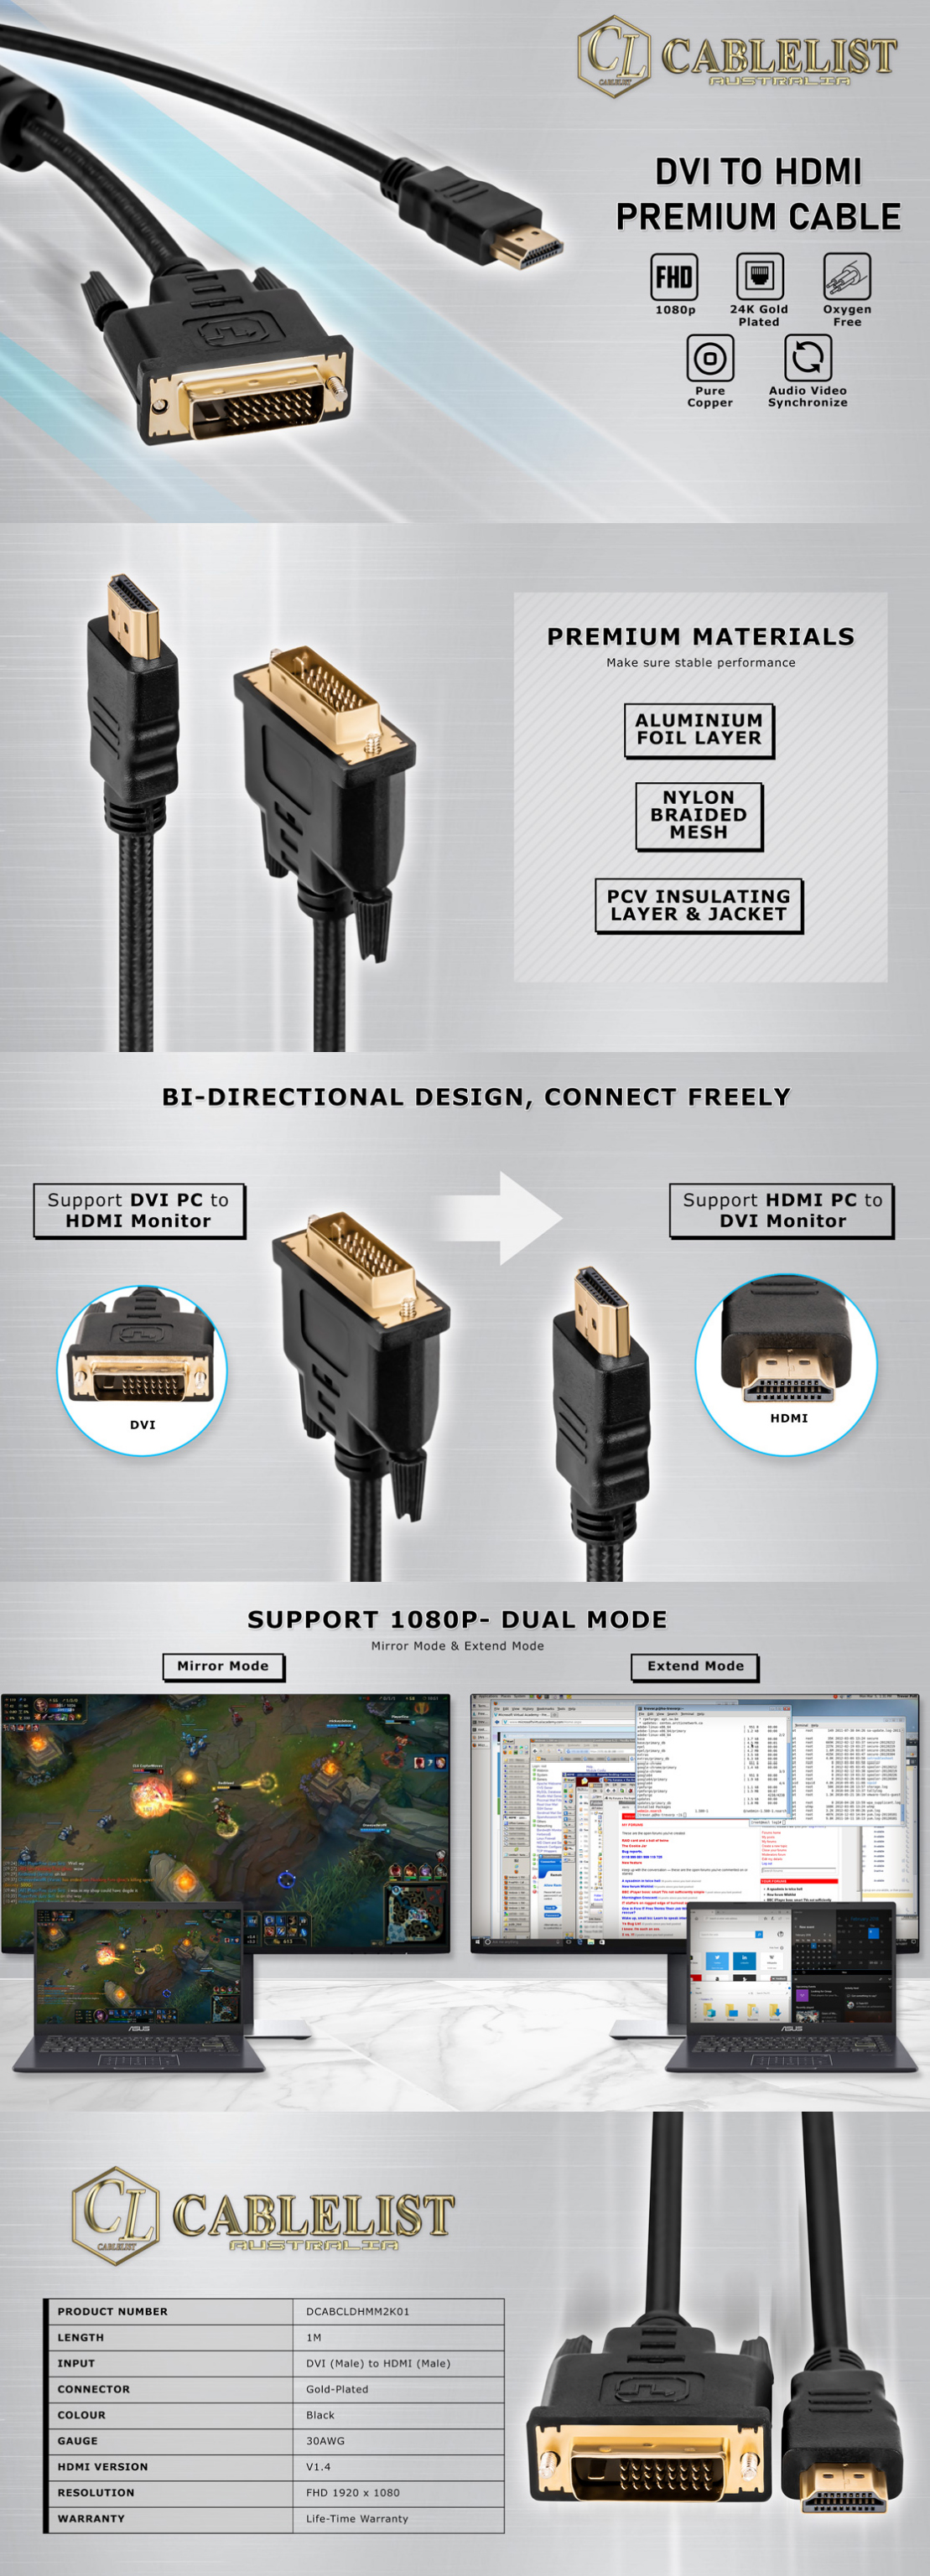 HDMI-Cables-Cablelist-2K-DVI-to-HDMI-Male-to-Male-1m-Cable-2